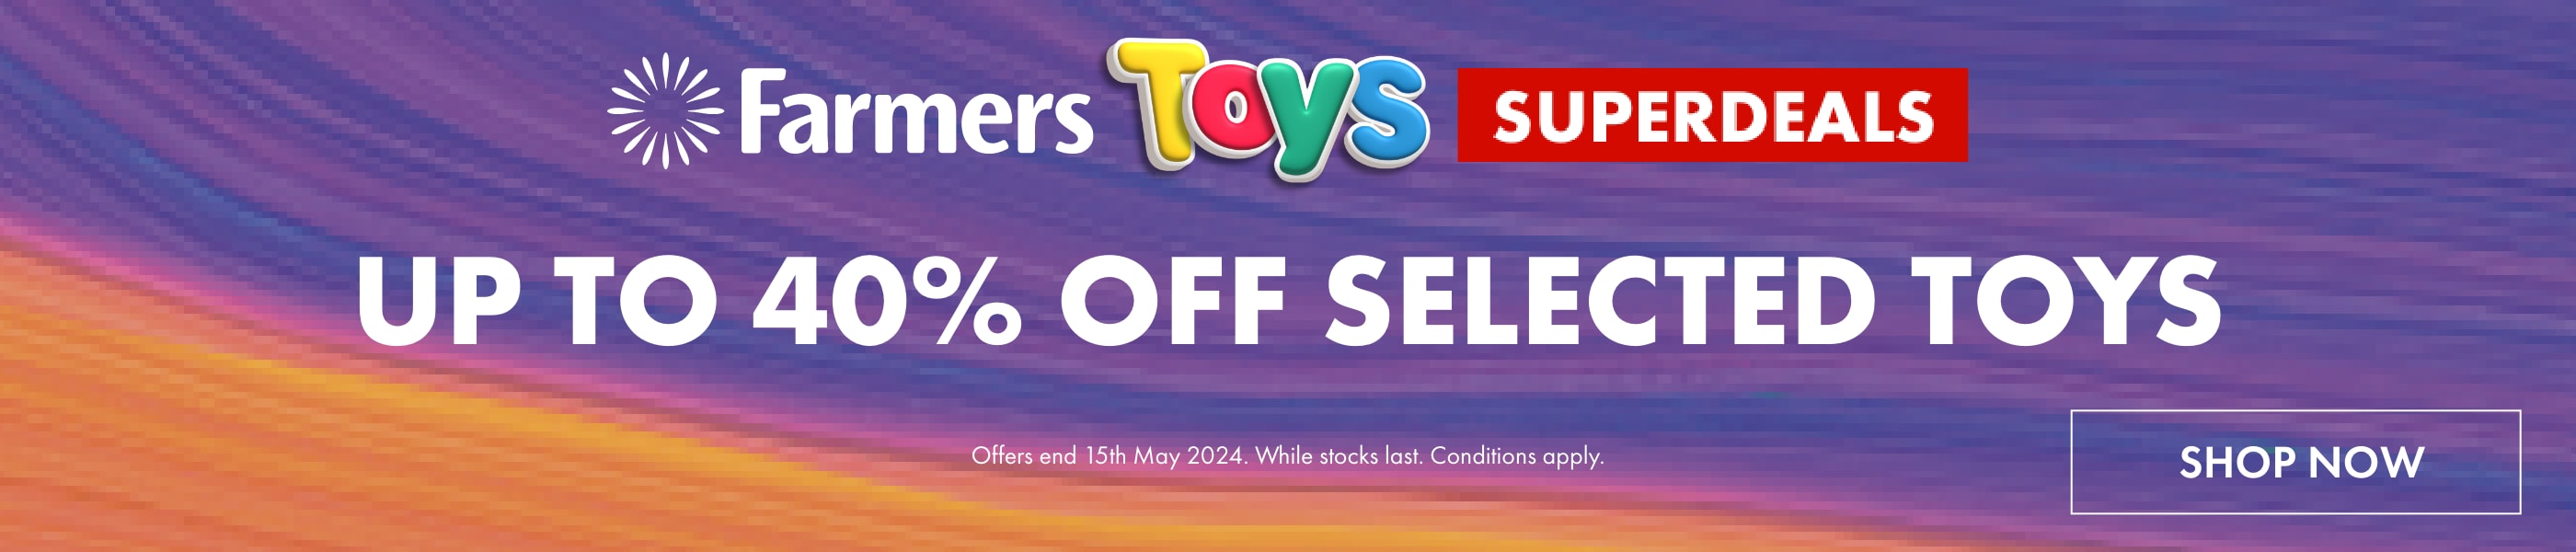 TIYS SUPERDEALS | UP TO 40% OFF THESES SELECTED TOYS 